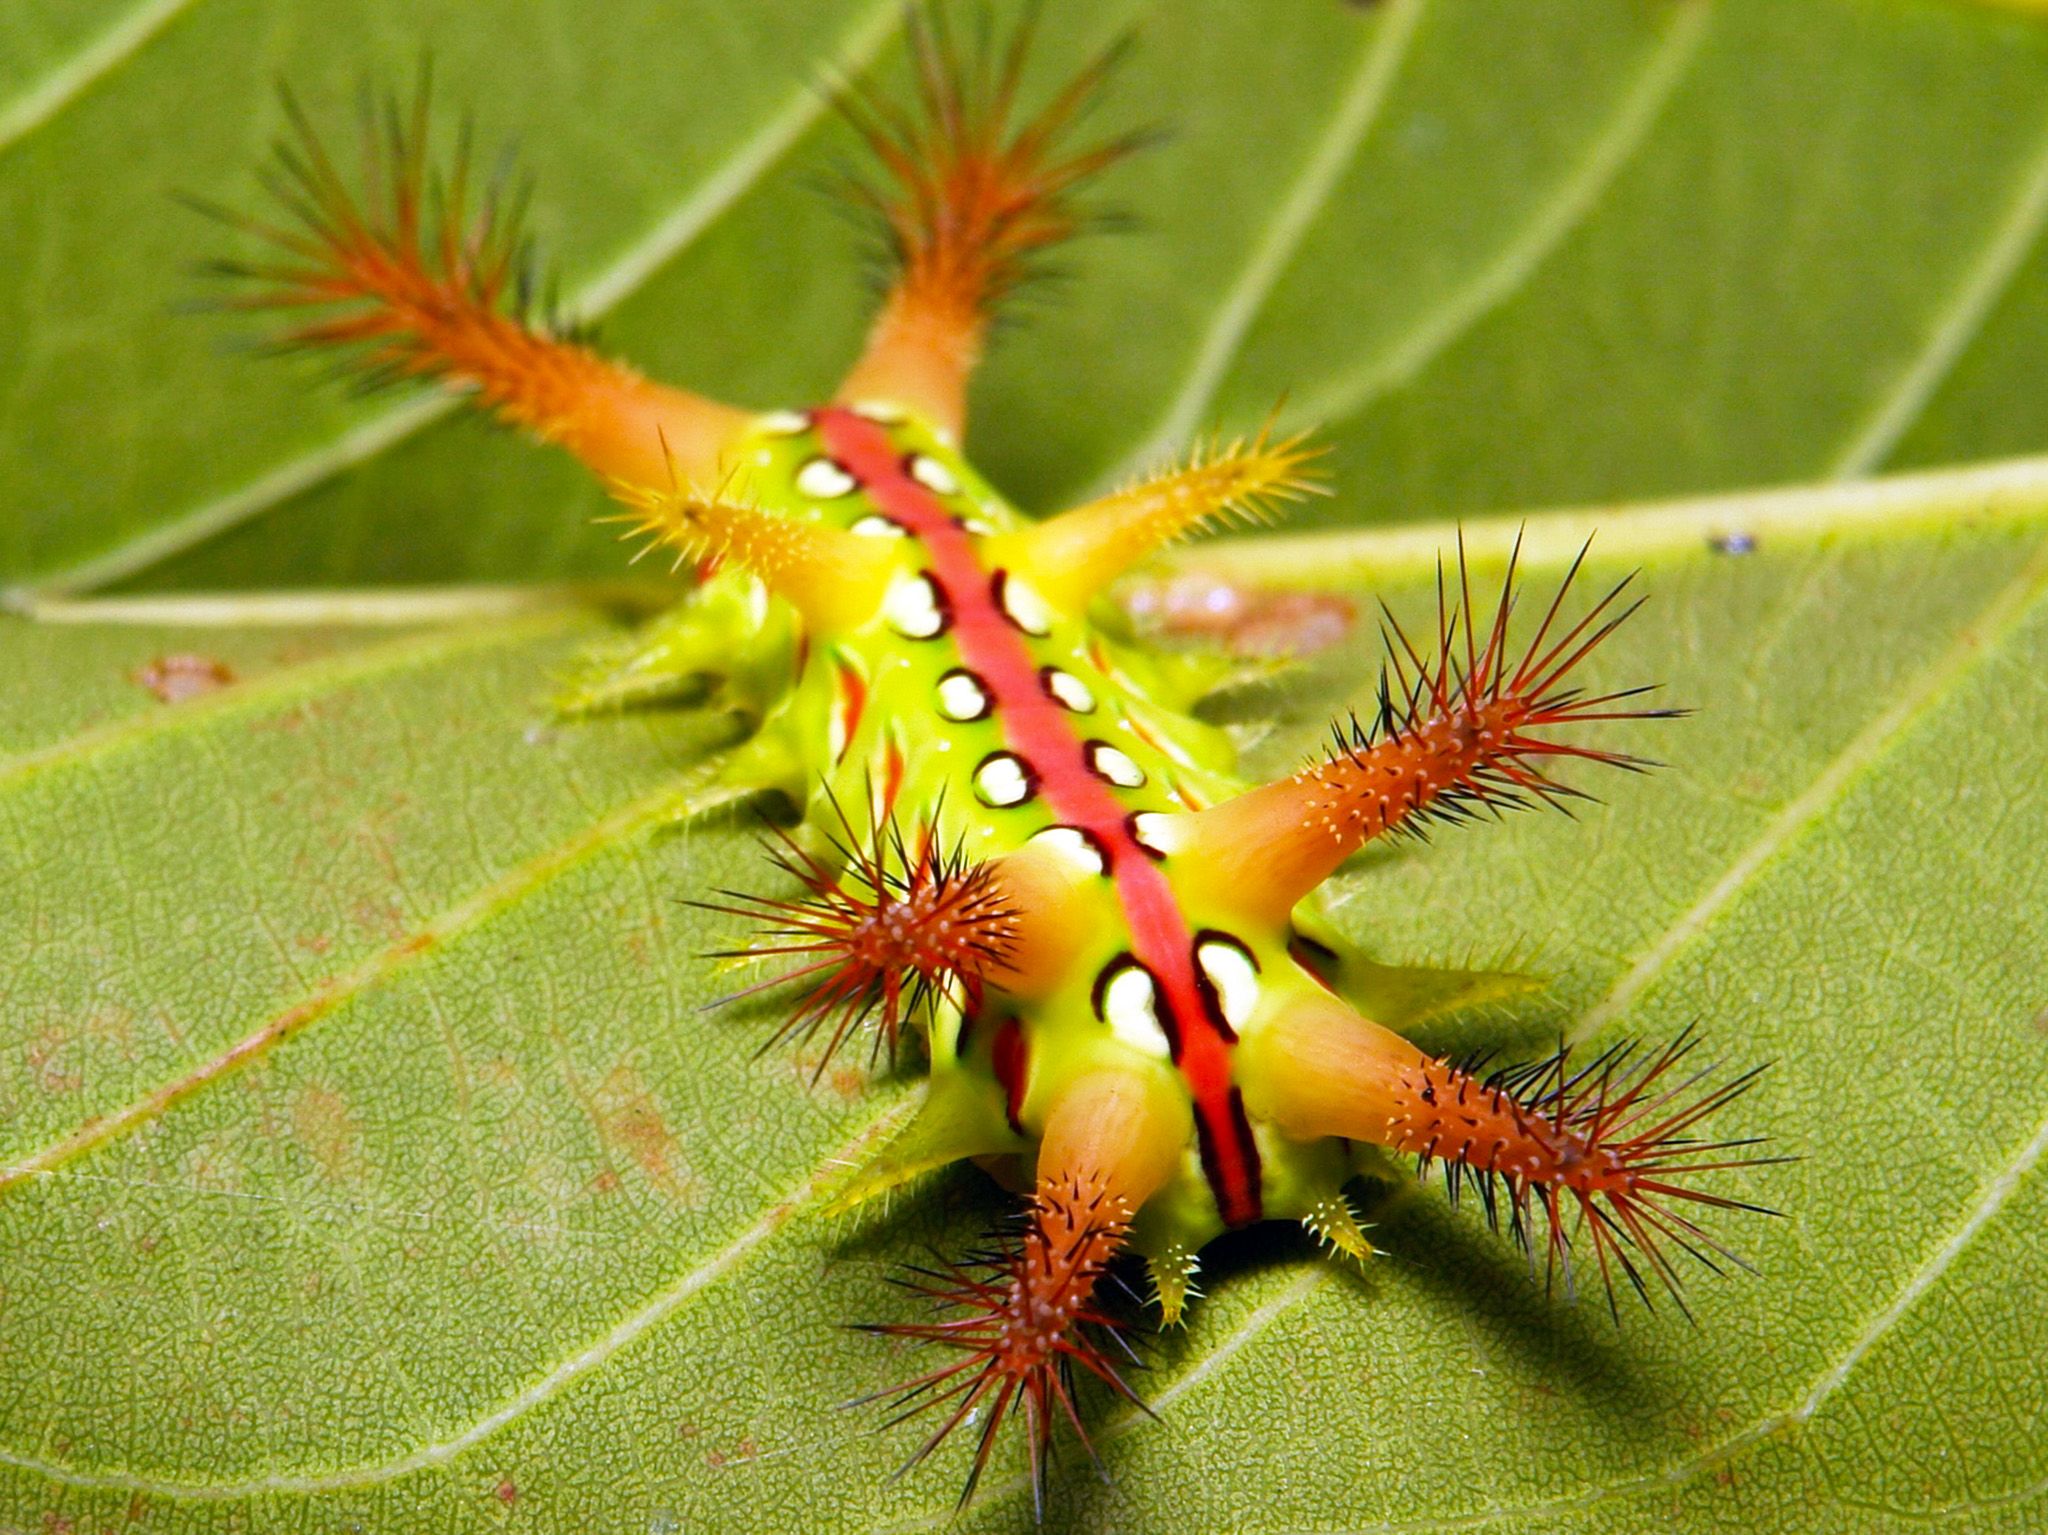 Stinging Nettle Slug Caterpillar (Cup Moth, Limacodidae) "The Jester". This image is from The... [Photo of the day - October 2019]